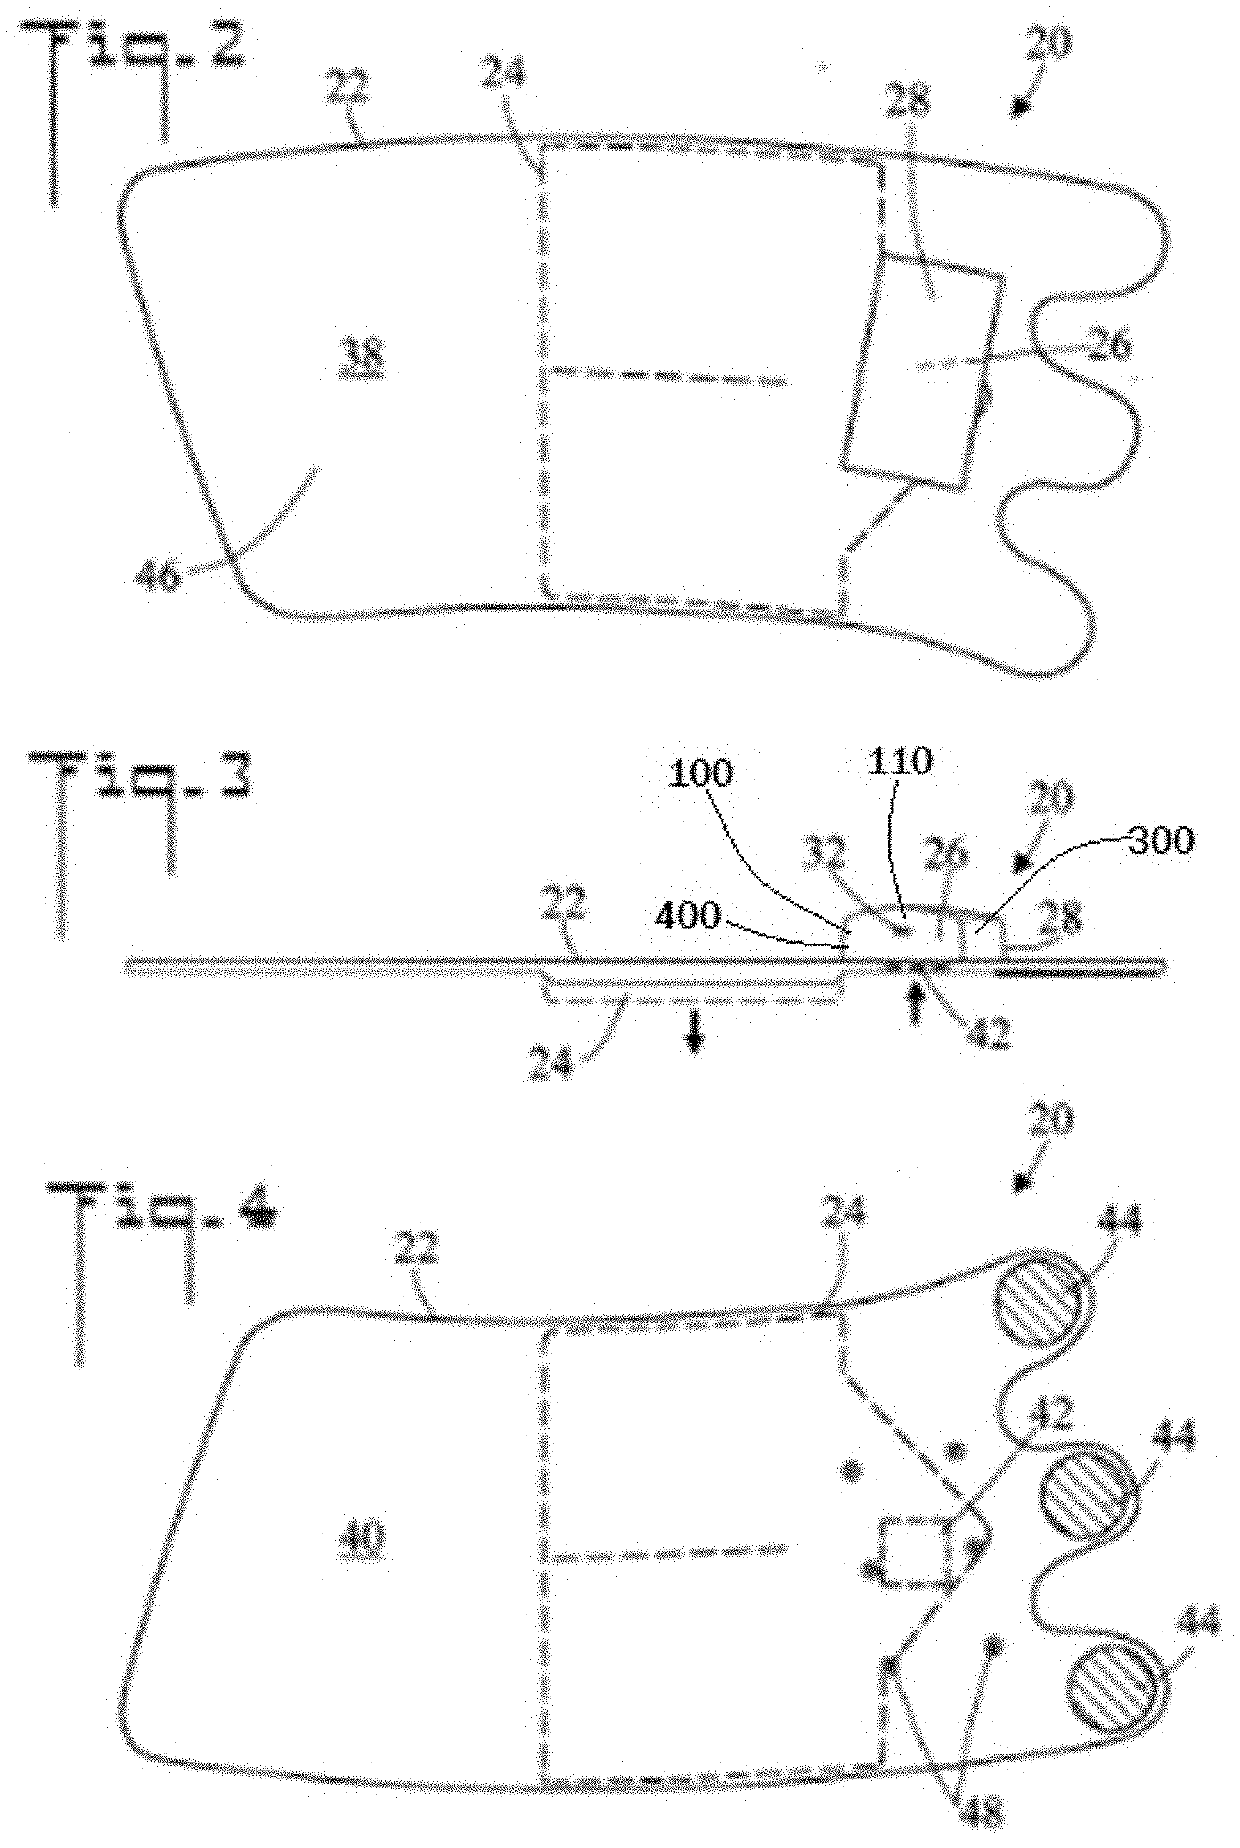 Apparatus for applying periodic pressure to the limb of a patient and method of use